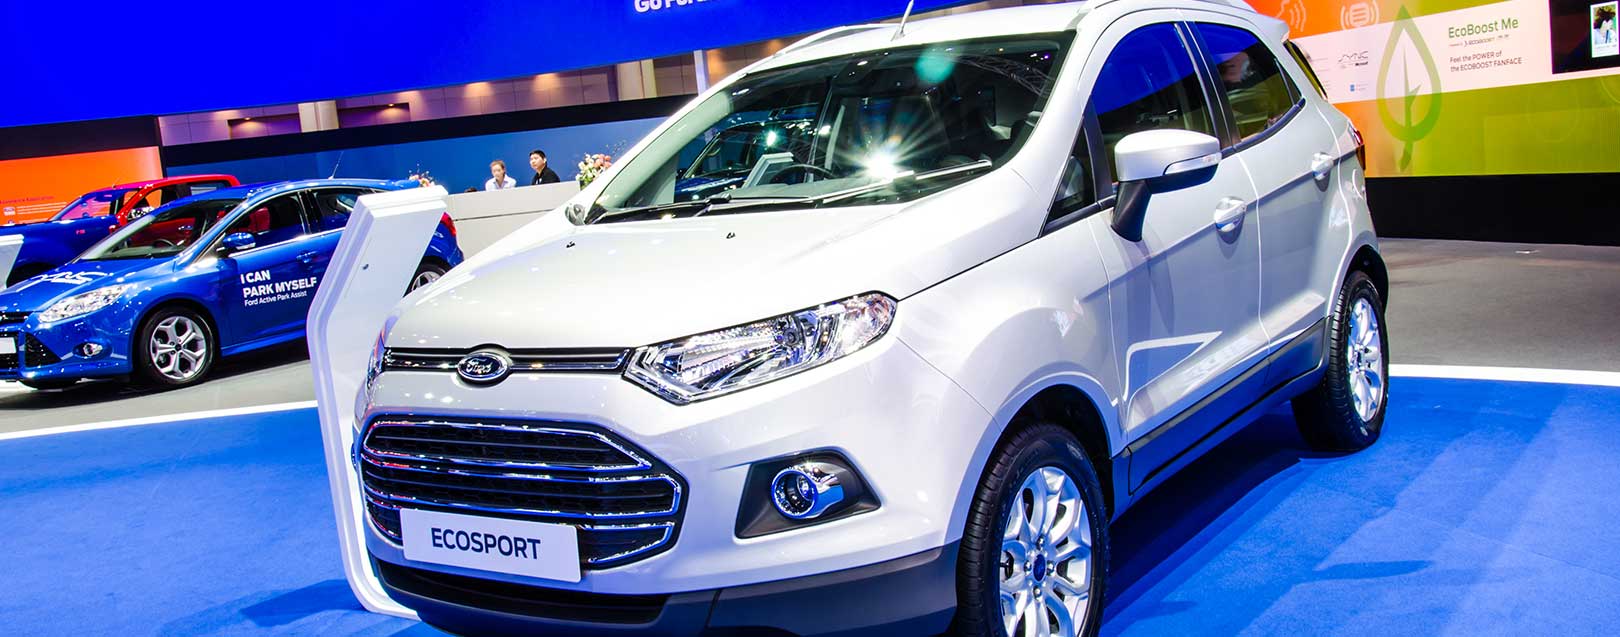 EcoSport is the top exported car from India in FY16